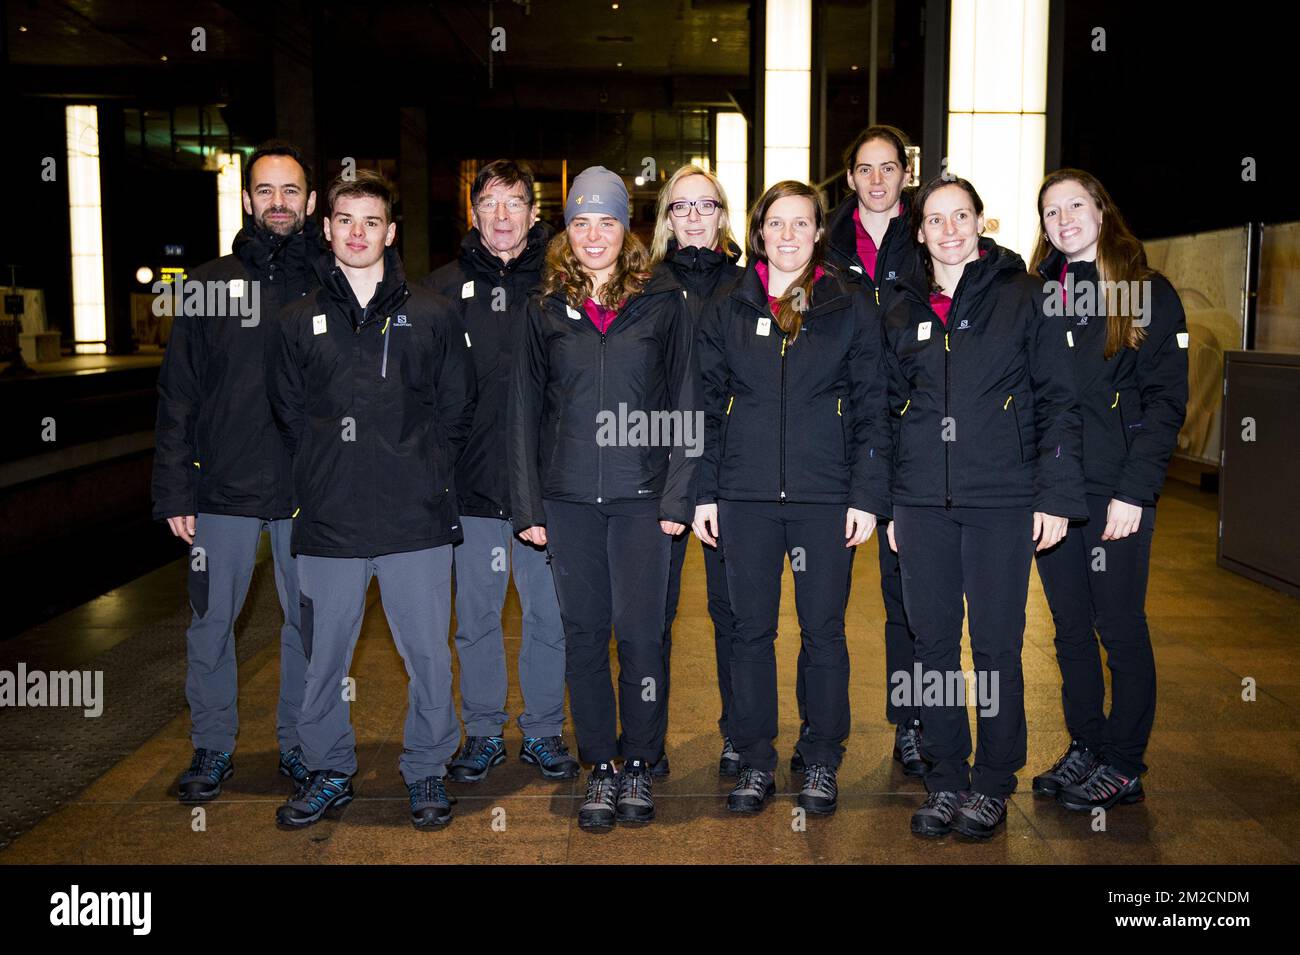 Snowboard team leader Tom Coeckelberghs, Belgian snowboarder Stef Vandeweyer, BOIC-COIB delegation leader Eddy De Smedt, Belgian skier Kim Vanreusel, Belgian bobsleigh breaker Sophie Vercruyssen, Belgian athlete Sara Aerts, Belgian bobsleigh pilot An Vannieuwenhuyse and Belgian bobsleigh breaker Shana Vanhaen pictured during the departure of athletes who will compete at the upcoming Winter Olympics, Saturday 03 February 2018 at the Antwerpen-Centraal train station. The XXIII Olympic Winter Games are taking place from 9 February to 25 February in Pyeongchang County, South Korea. BELGA PHOTO JAS Stock Photo